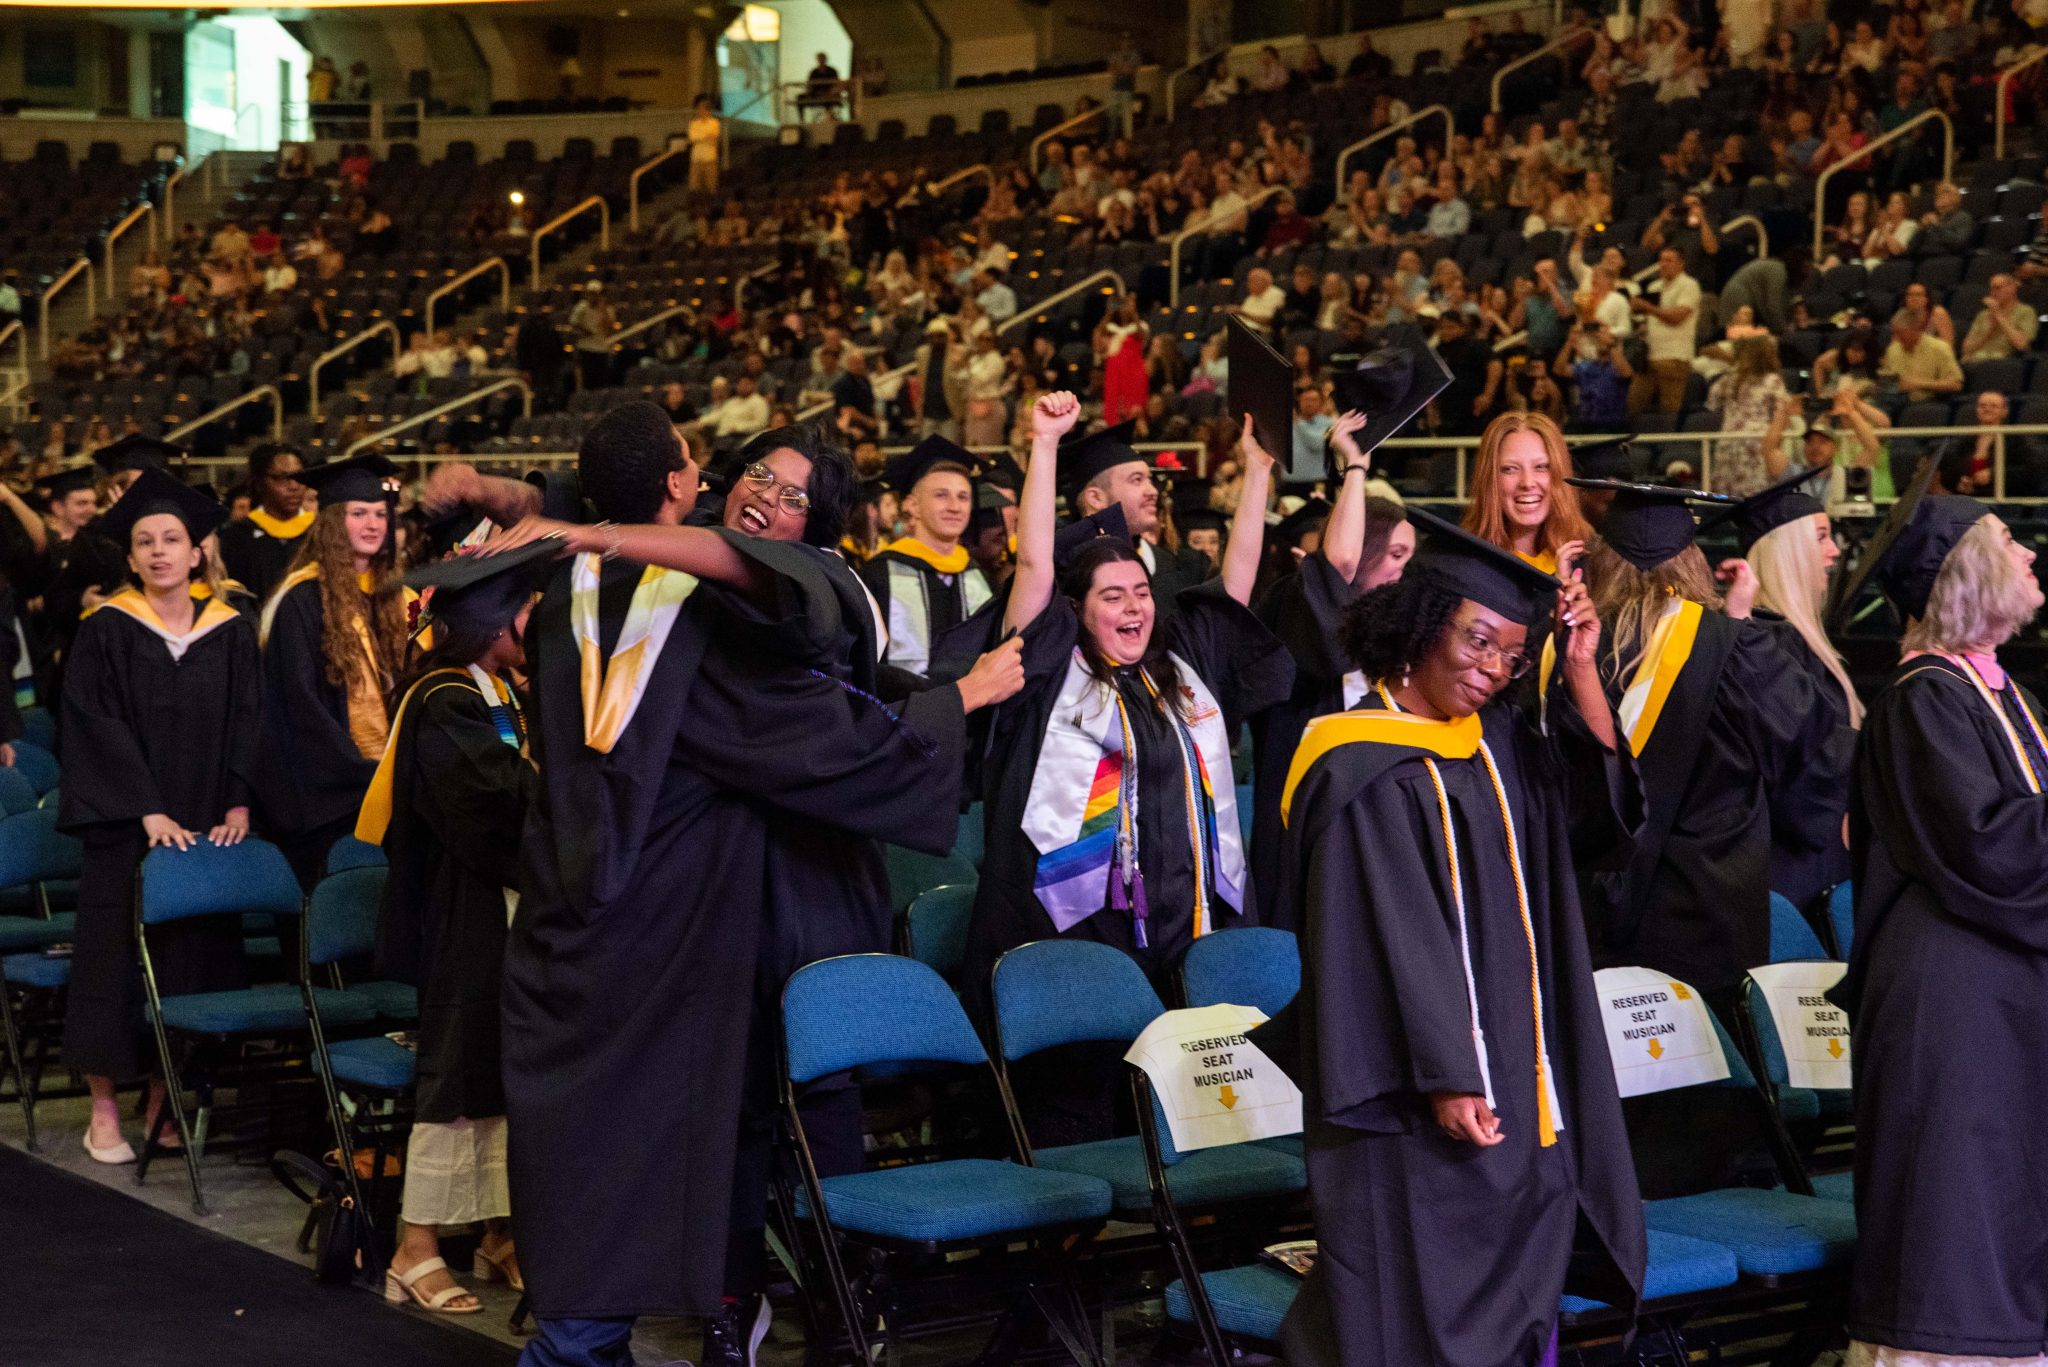 Saint Rose celebrates the Class of 2023 at commencement The College